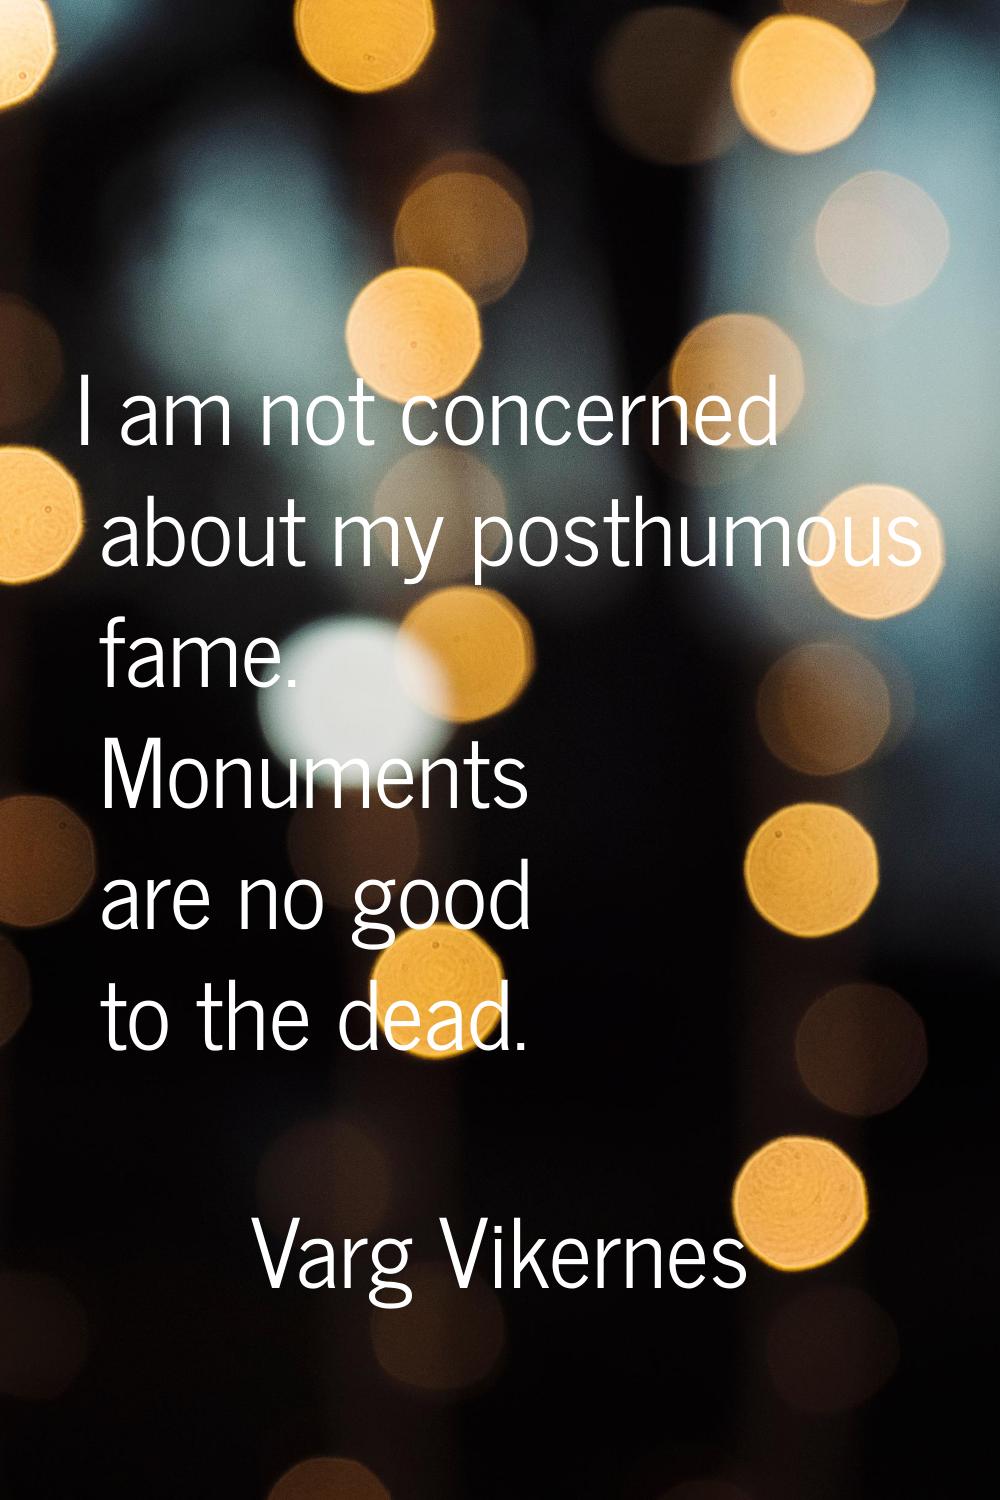 I am not concerned about my posthumous fame. Monuments are no good to the dead.